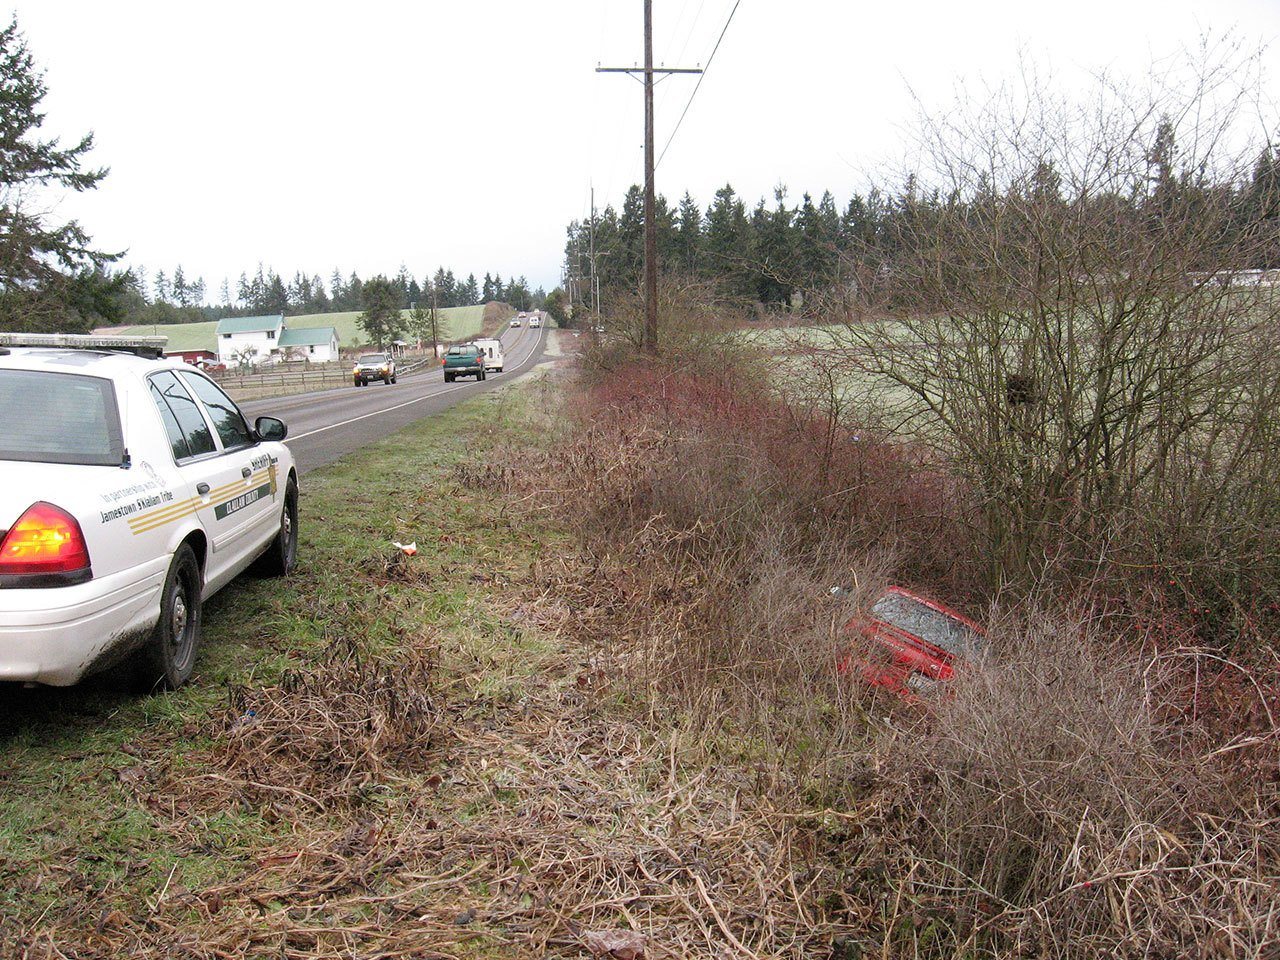 A Clallam County Sheriff’s Office cruiser sits along Sequim-Dungeness Way above a Toyota Celica found along the roadway Monday morning. A man walking a dog found the Toyota and called 9-1-1, leading to the rescue of a Sequim resident trapped inside. (Brandon Stoppani/Clallam County Sheriff’s Office)